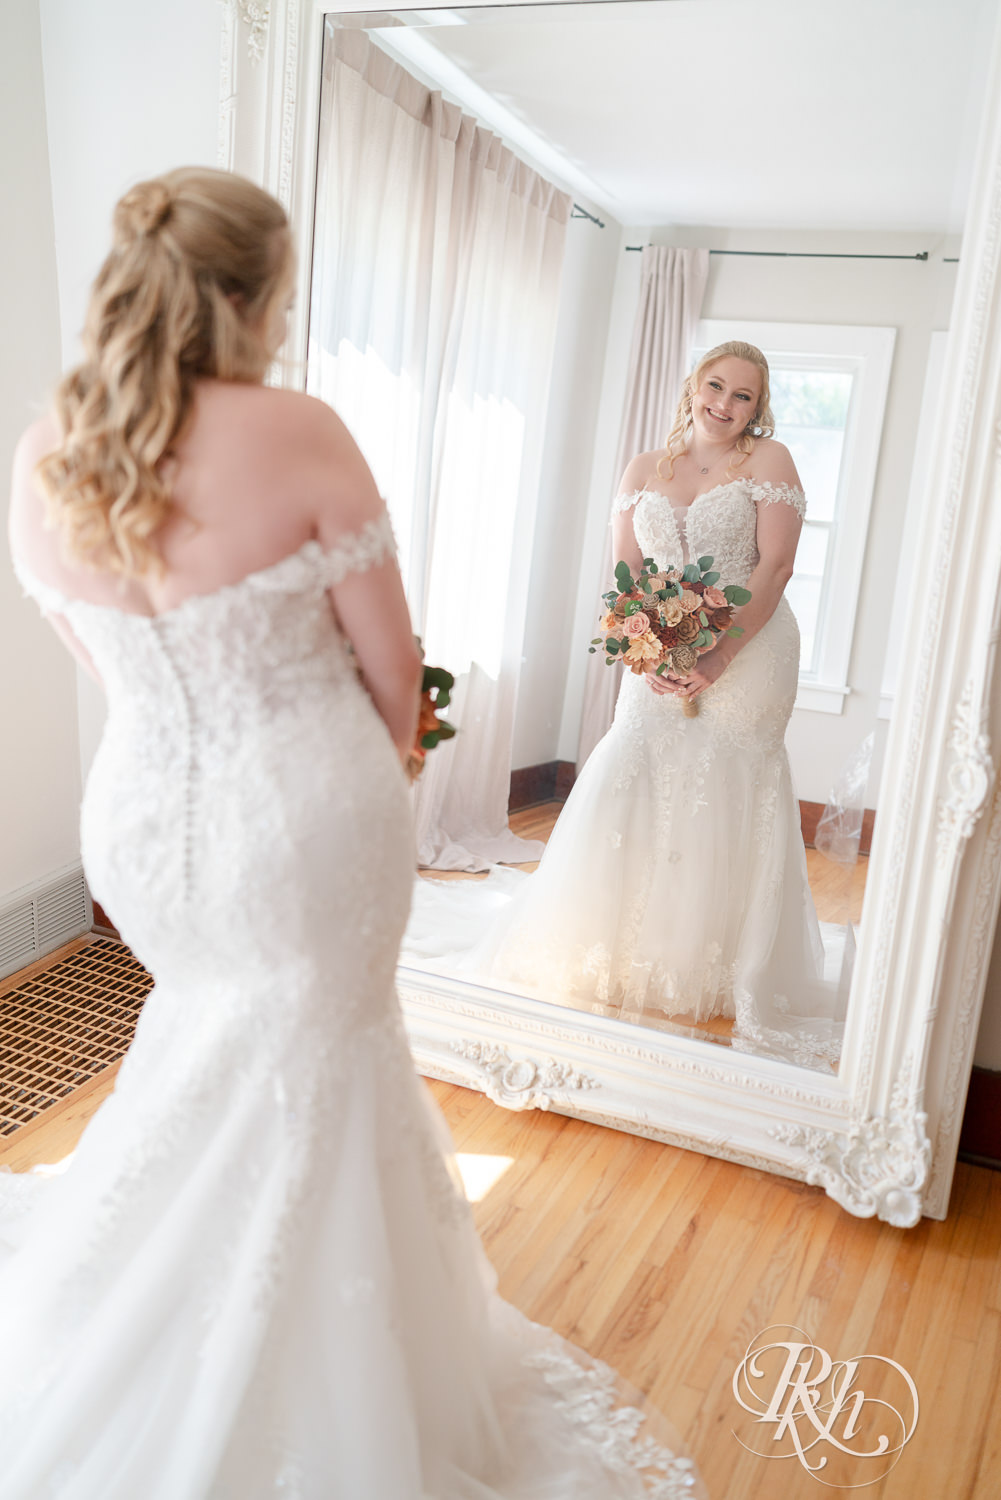 Bride smiling after getting into wedding dress at Cottage Farmhouse in Glencoe, Minnesota.